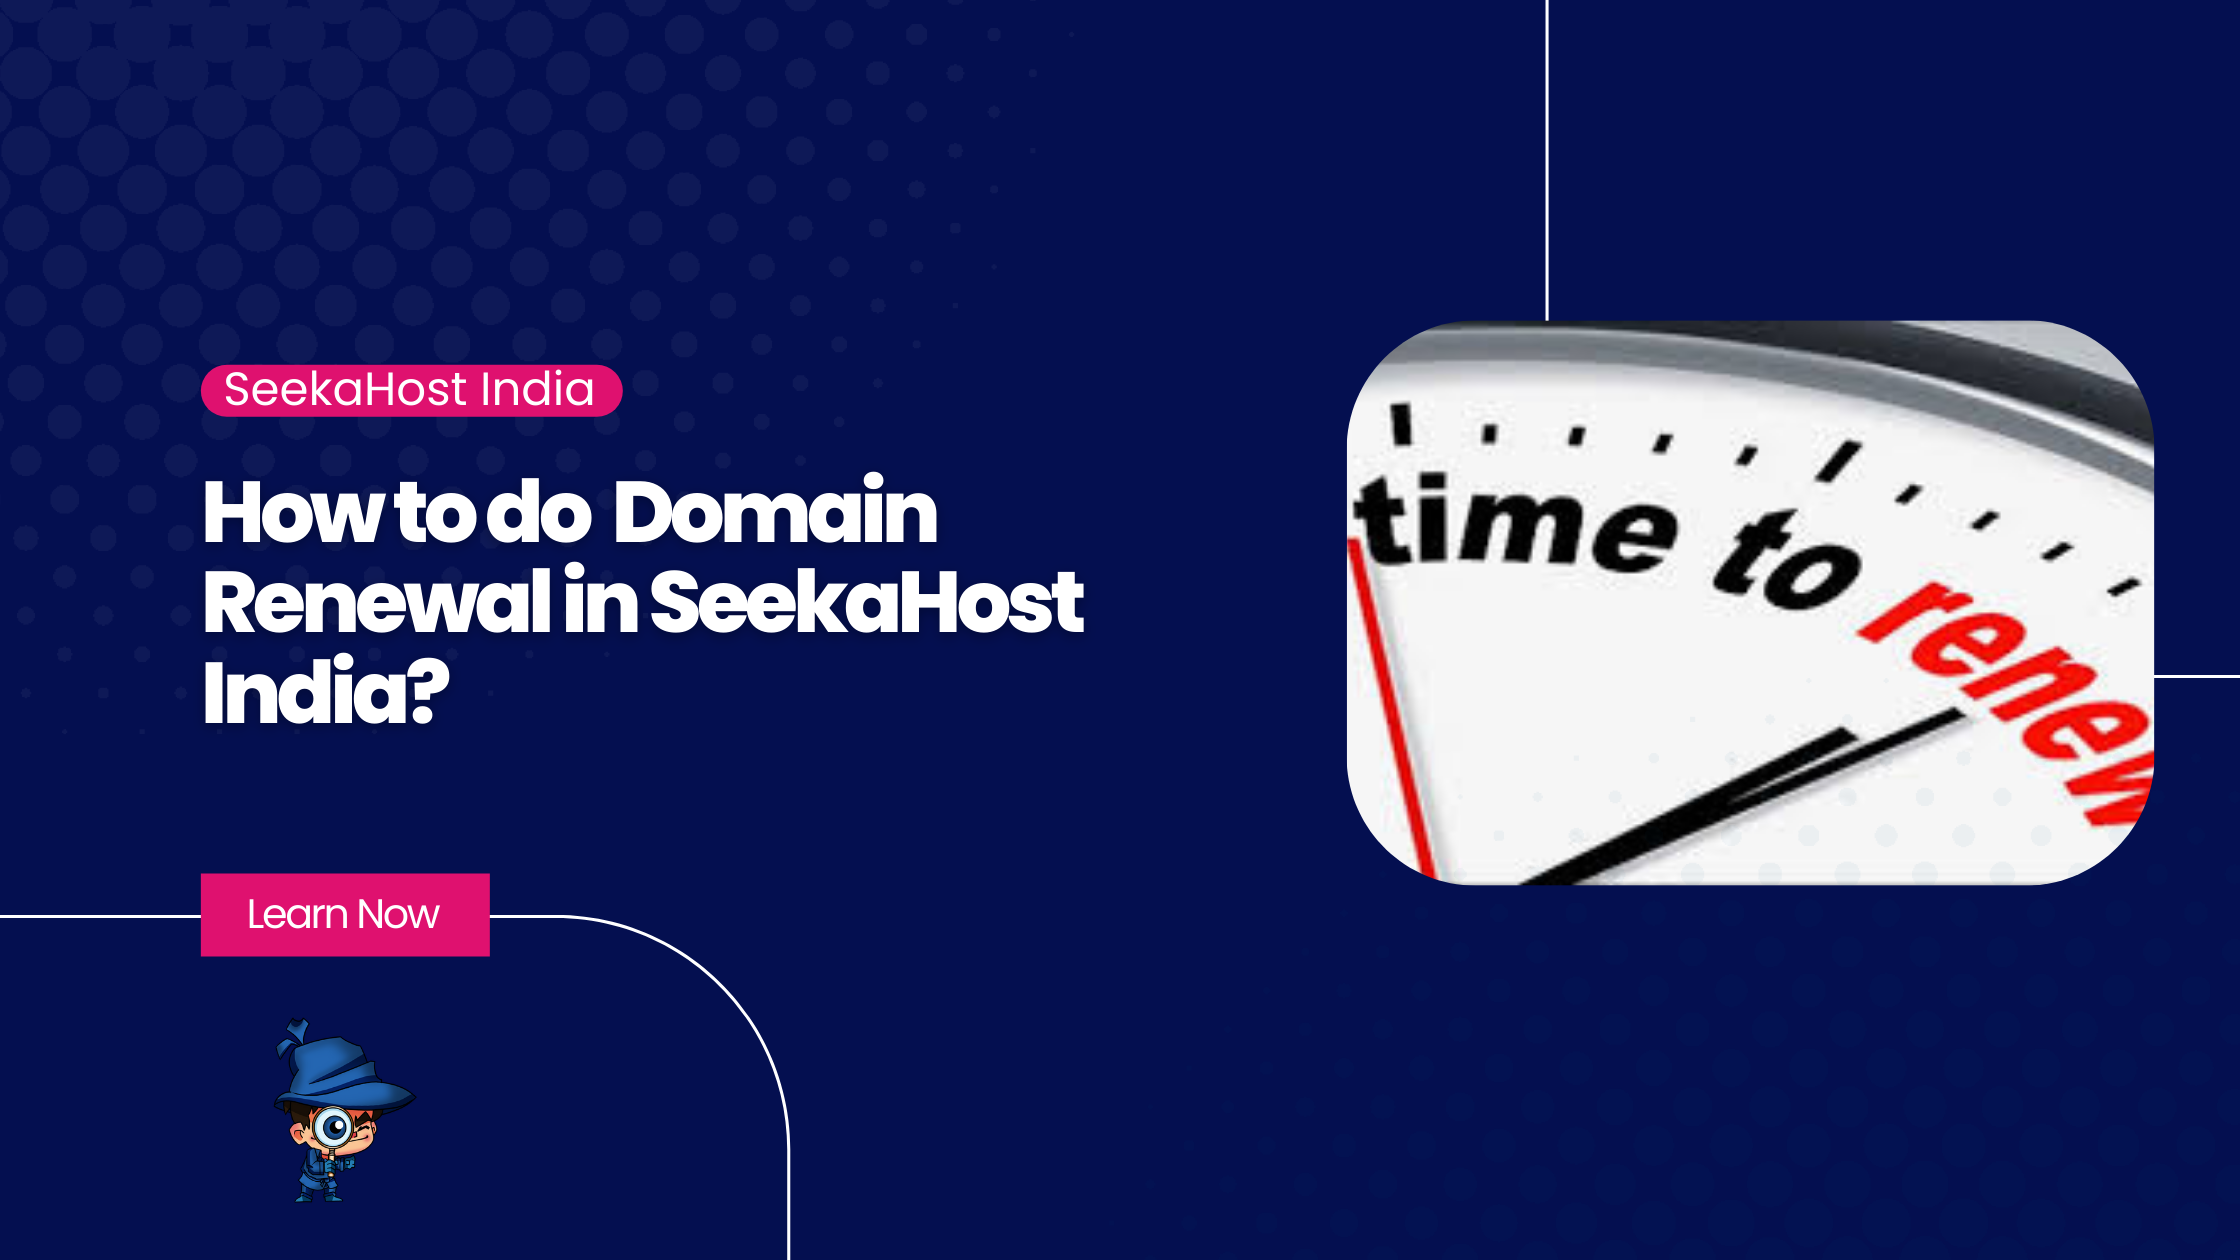 How to Domain Renewal in SeekaHost India